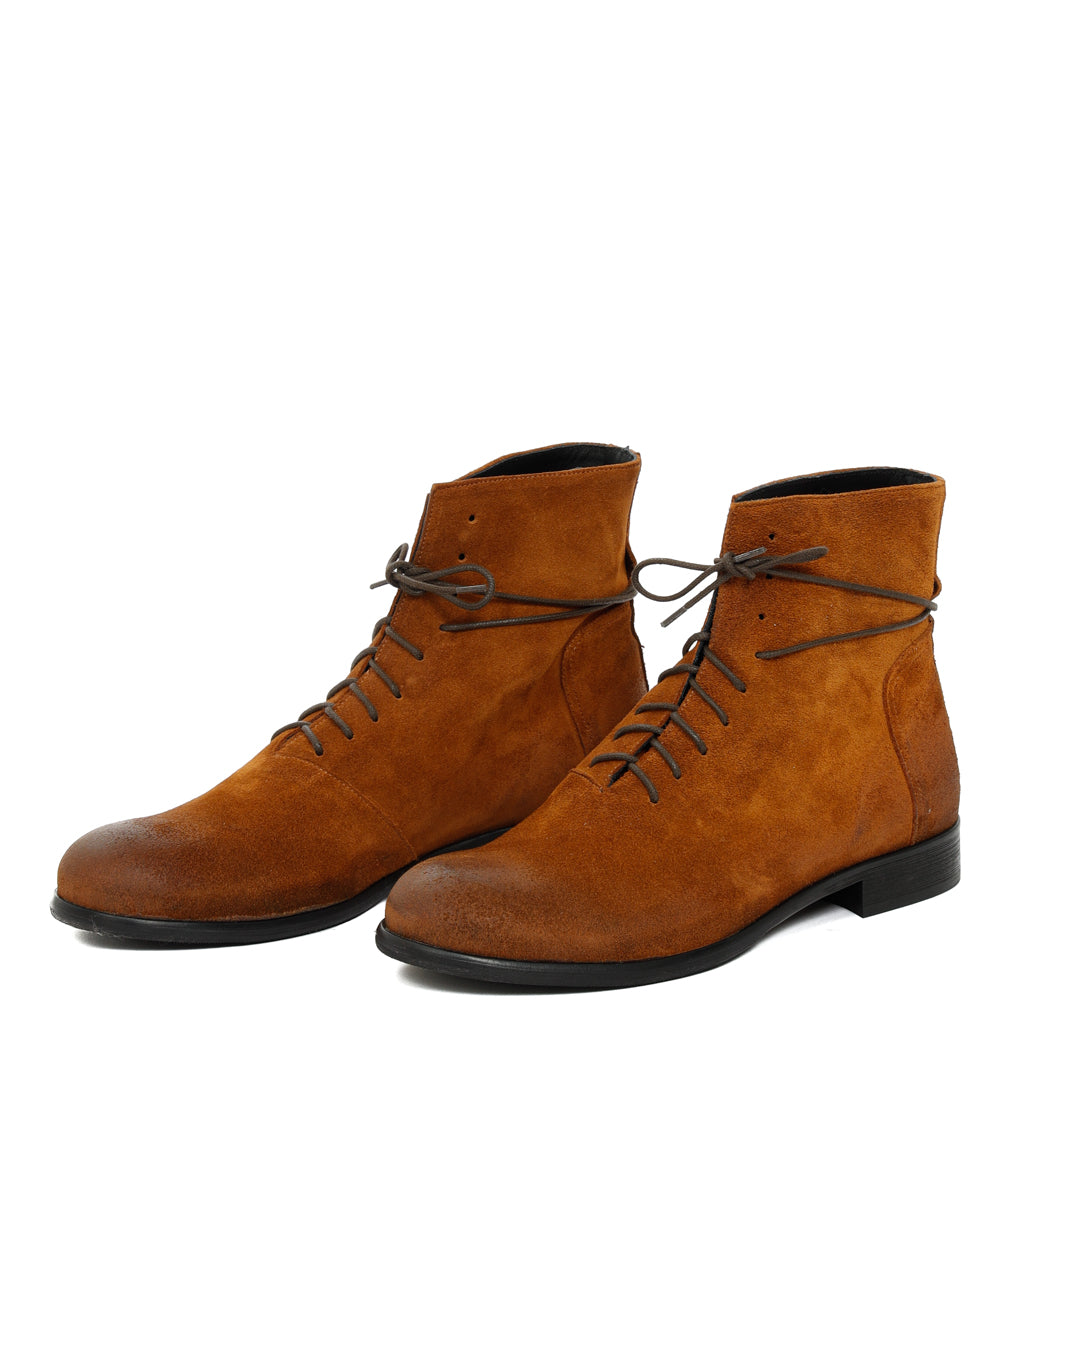 Houston - leather suede boot